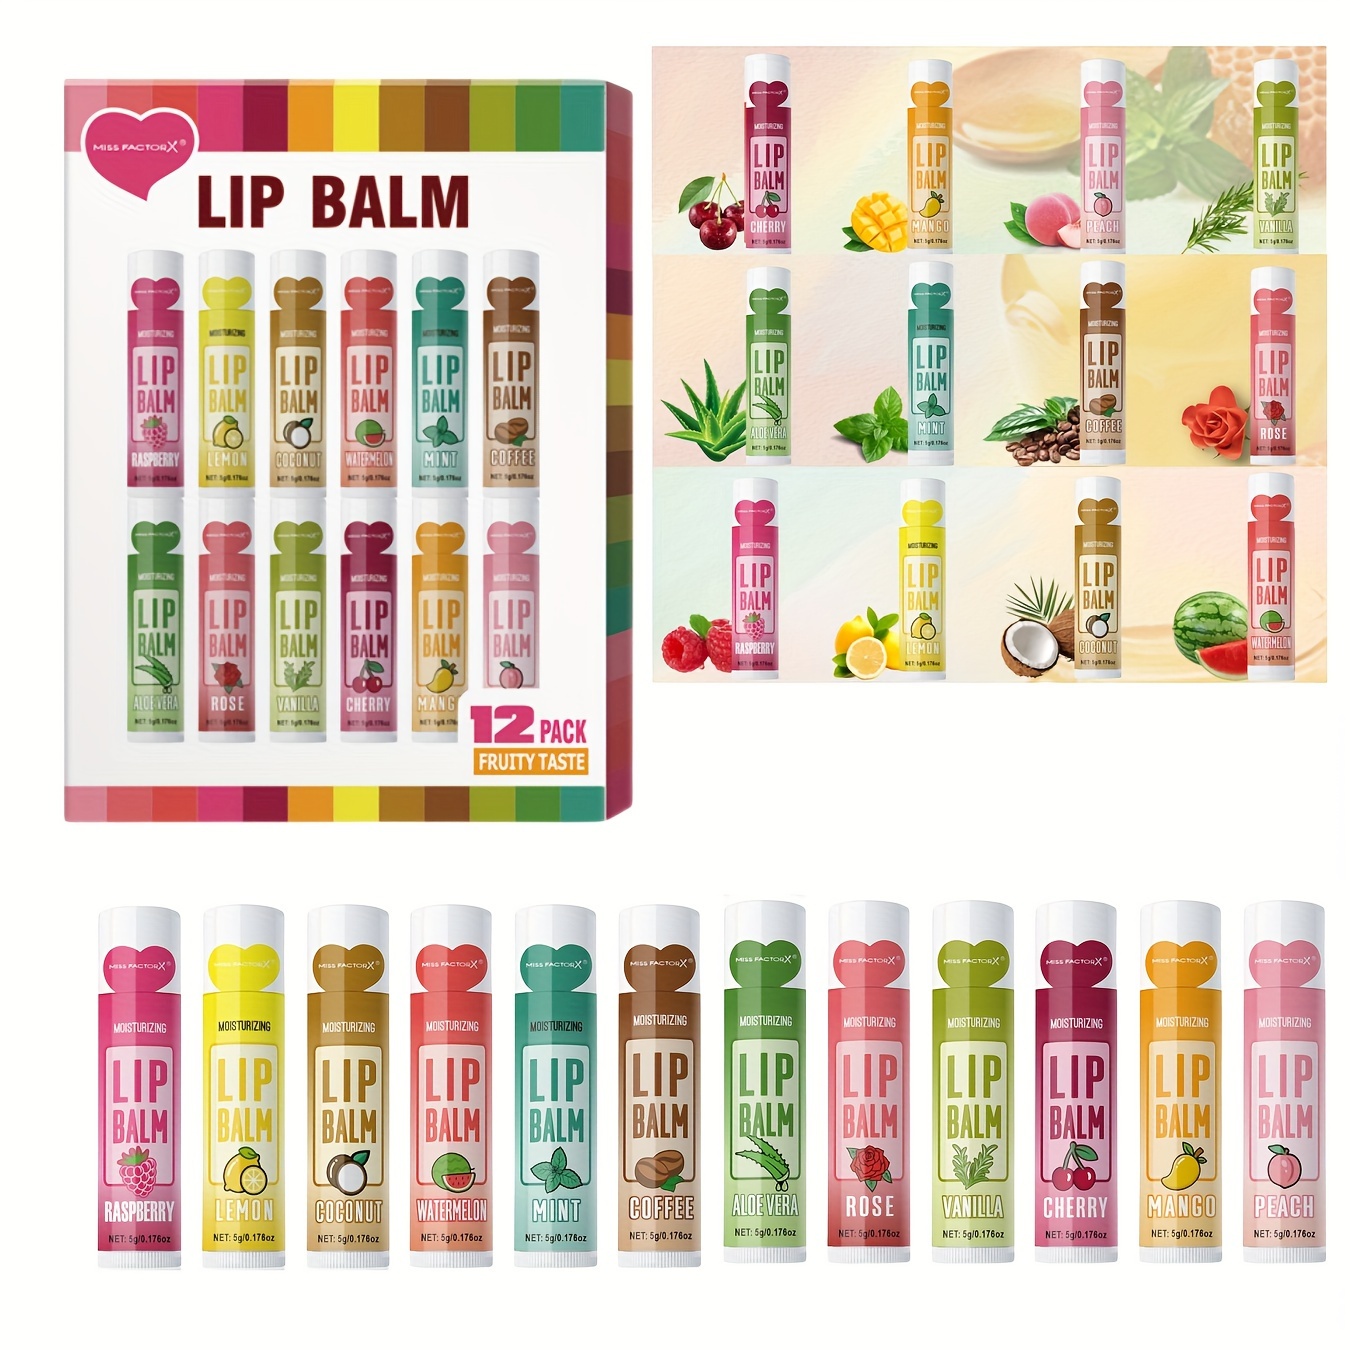 

12pcs/set, Lip Balm Gift Set, 5g Each, Assorted Flavors, Moisturizing & Hydrating Formula, Enhances Natural Lip Color, Ideal Gift For Women, For Party Favors And Holiday Gifts